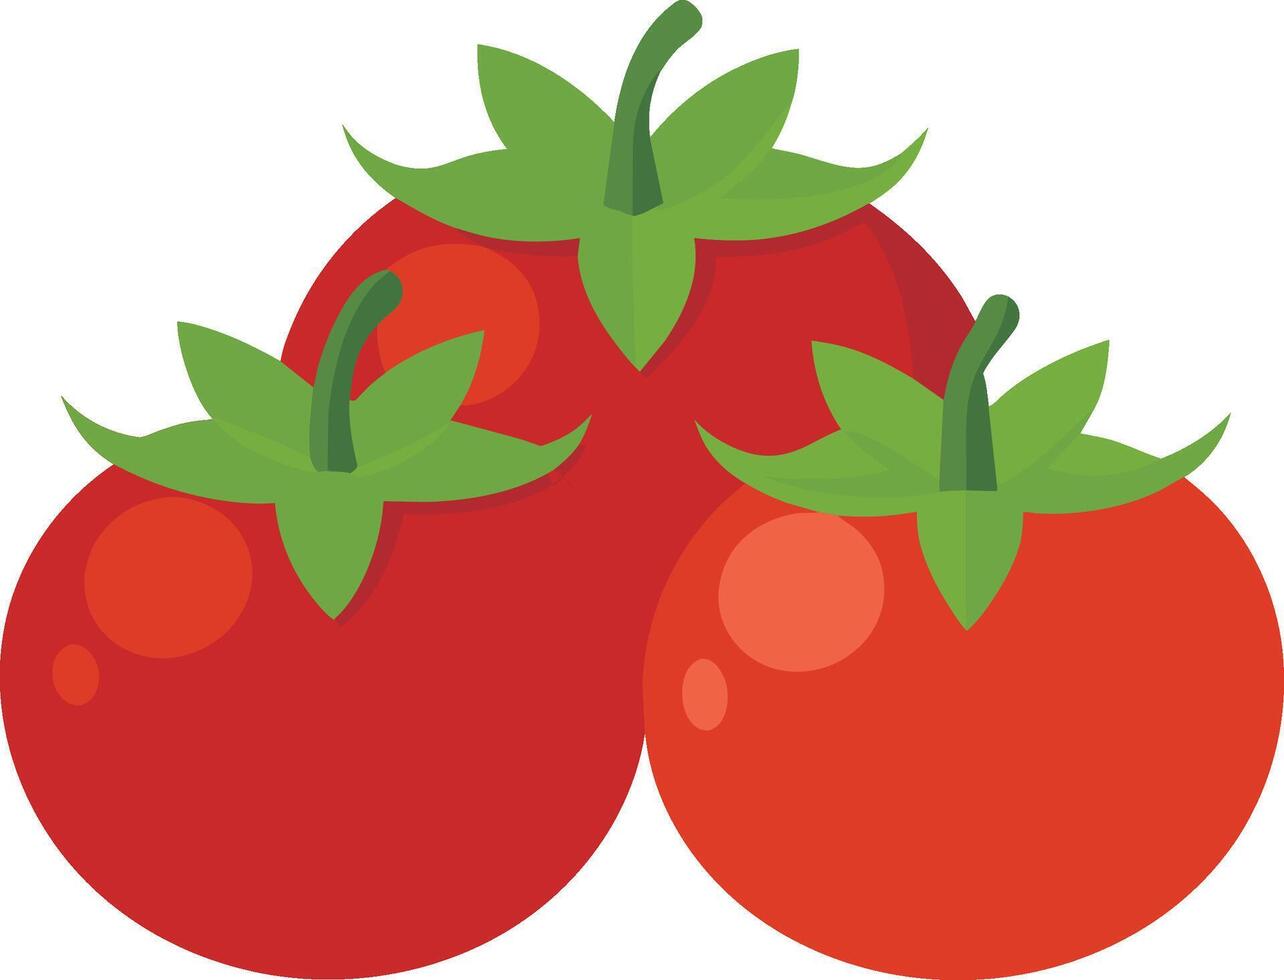 Fresh red tomatoes on white background vector illustration